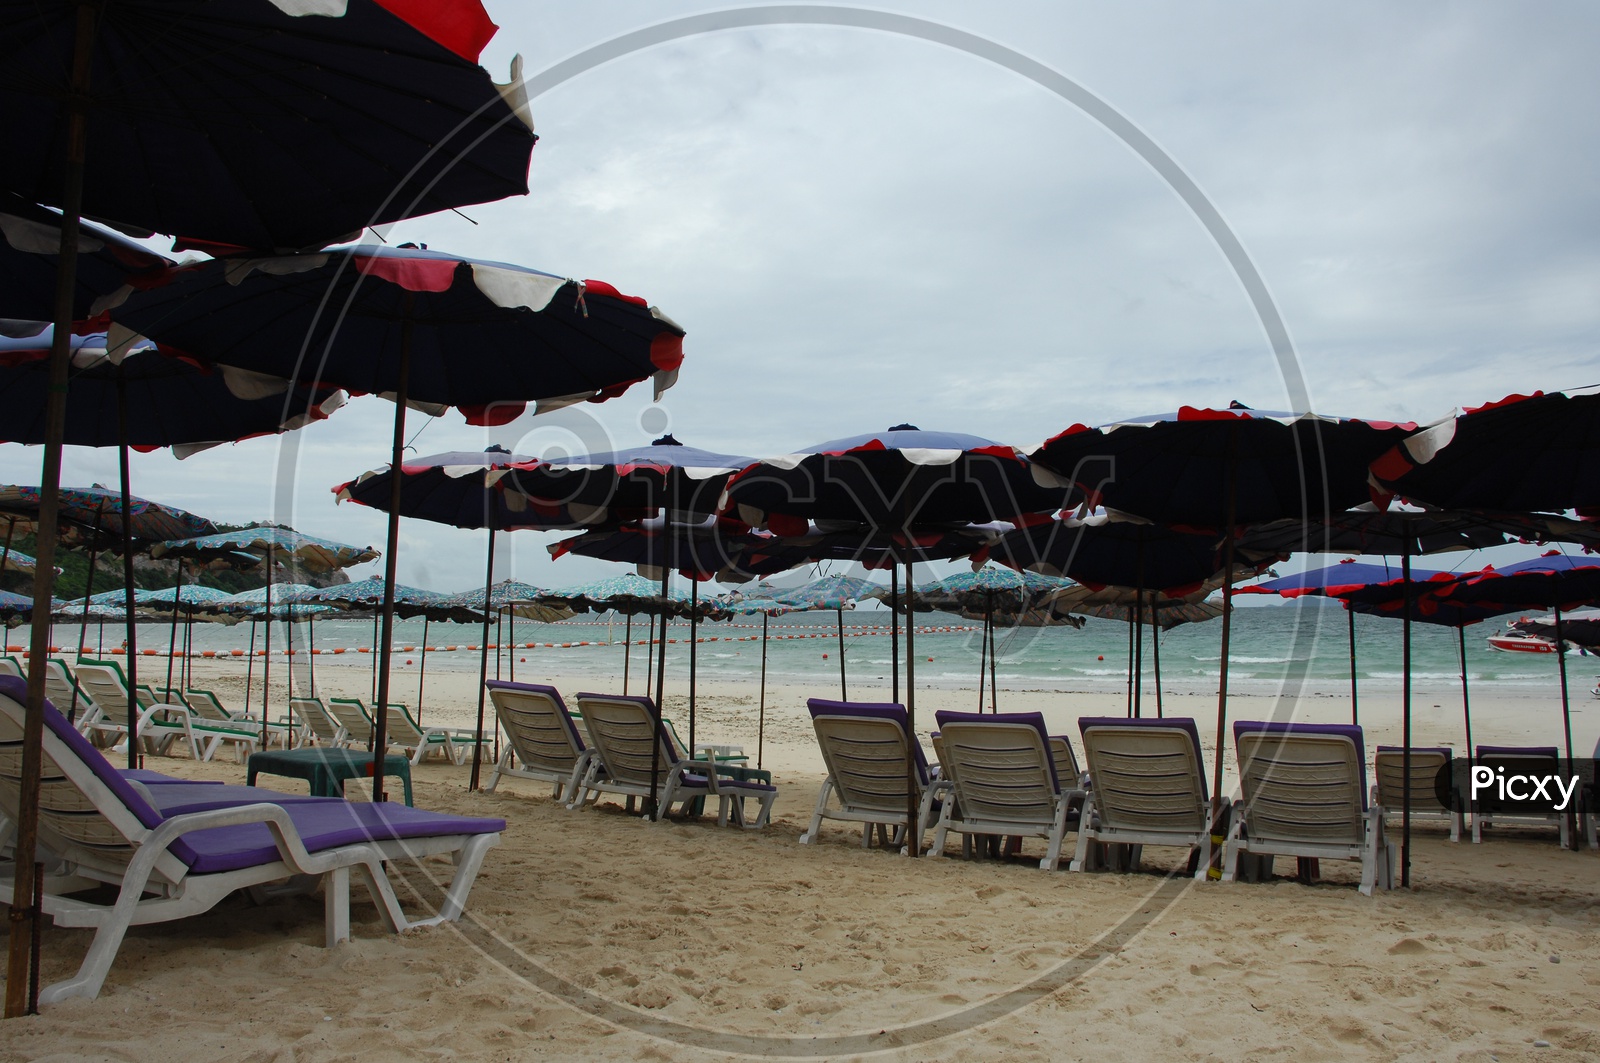 Pool chairs with umbrellas at the beach